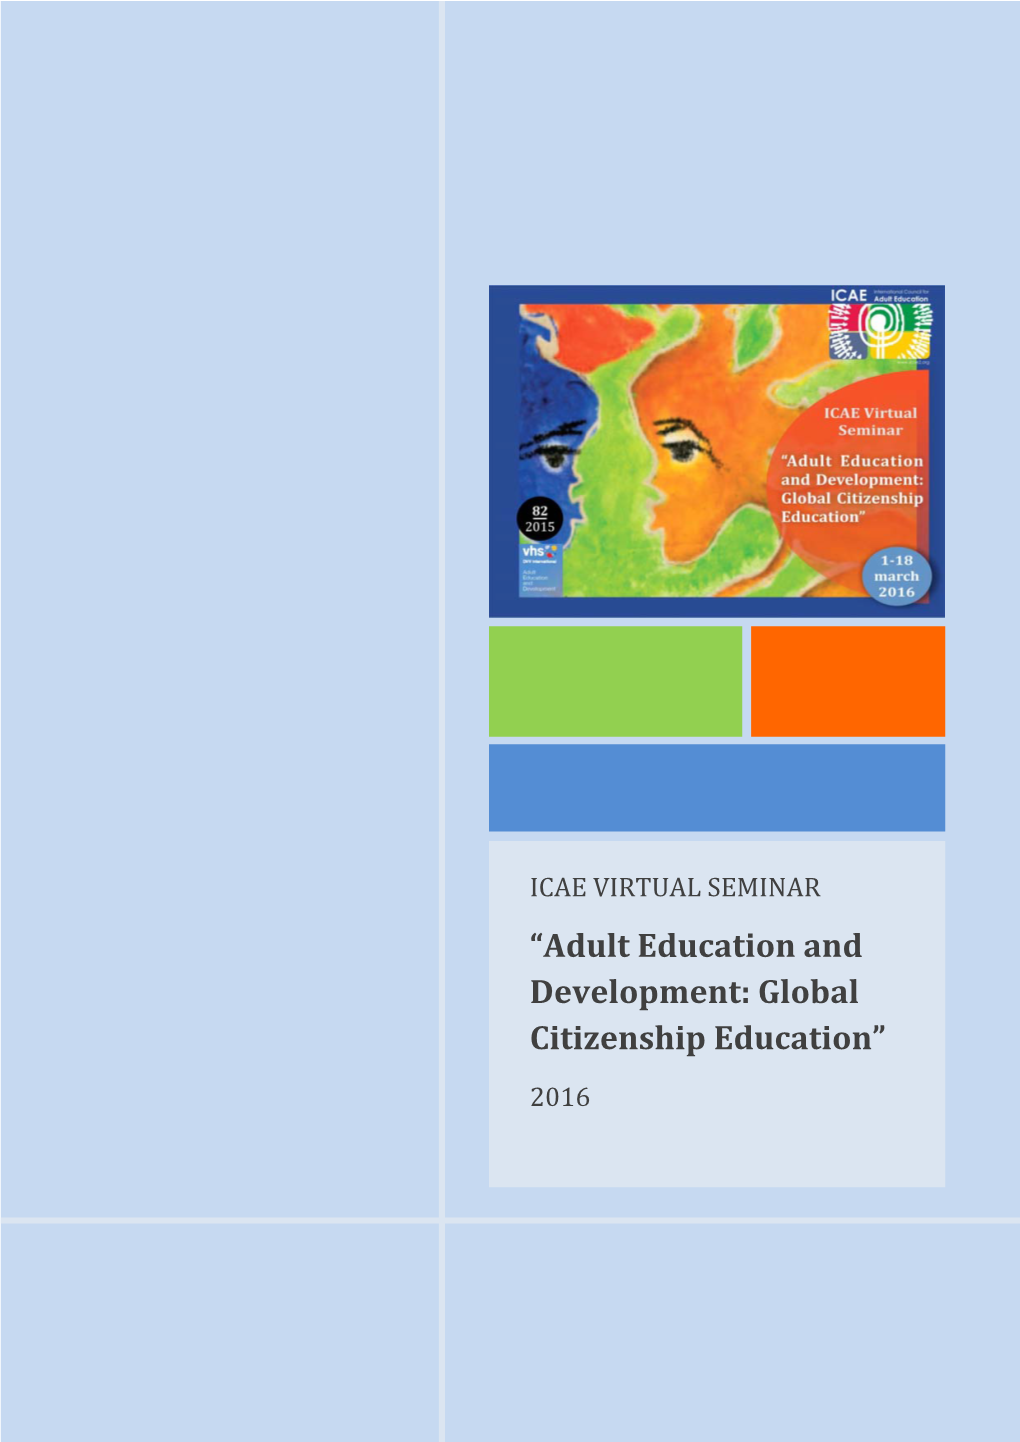 “Adult Education and Development: Global Citizenship Education” in Order to Go Deeper and Broaden in the Analysis